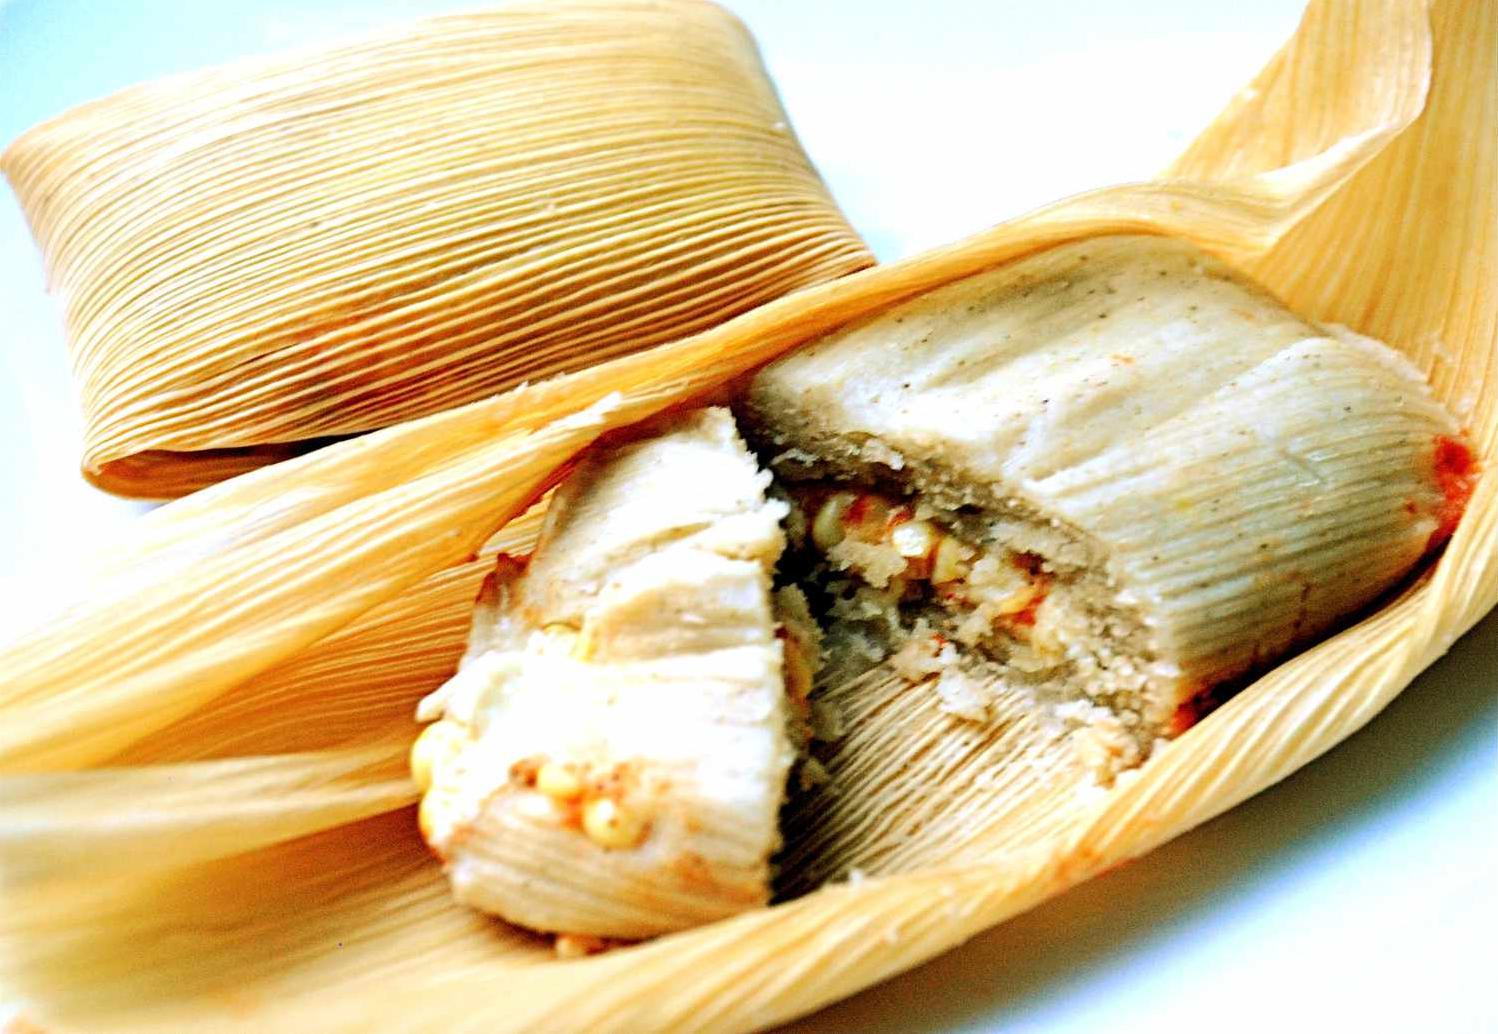  These tamales may be vegetarian, but they're packed with flavor!